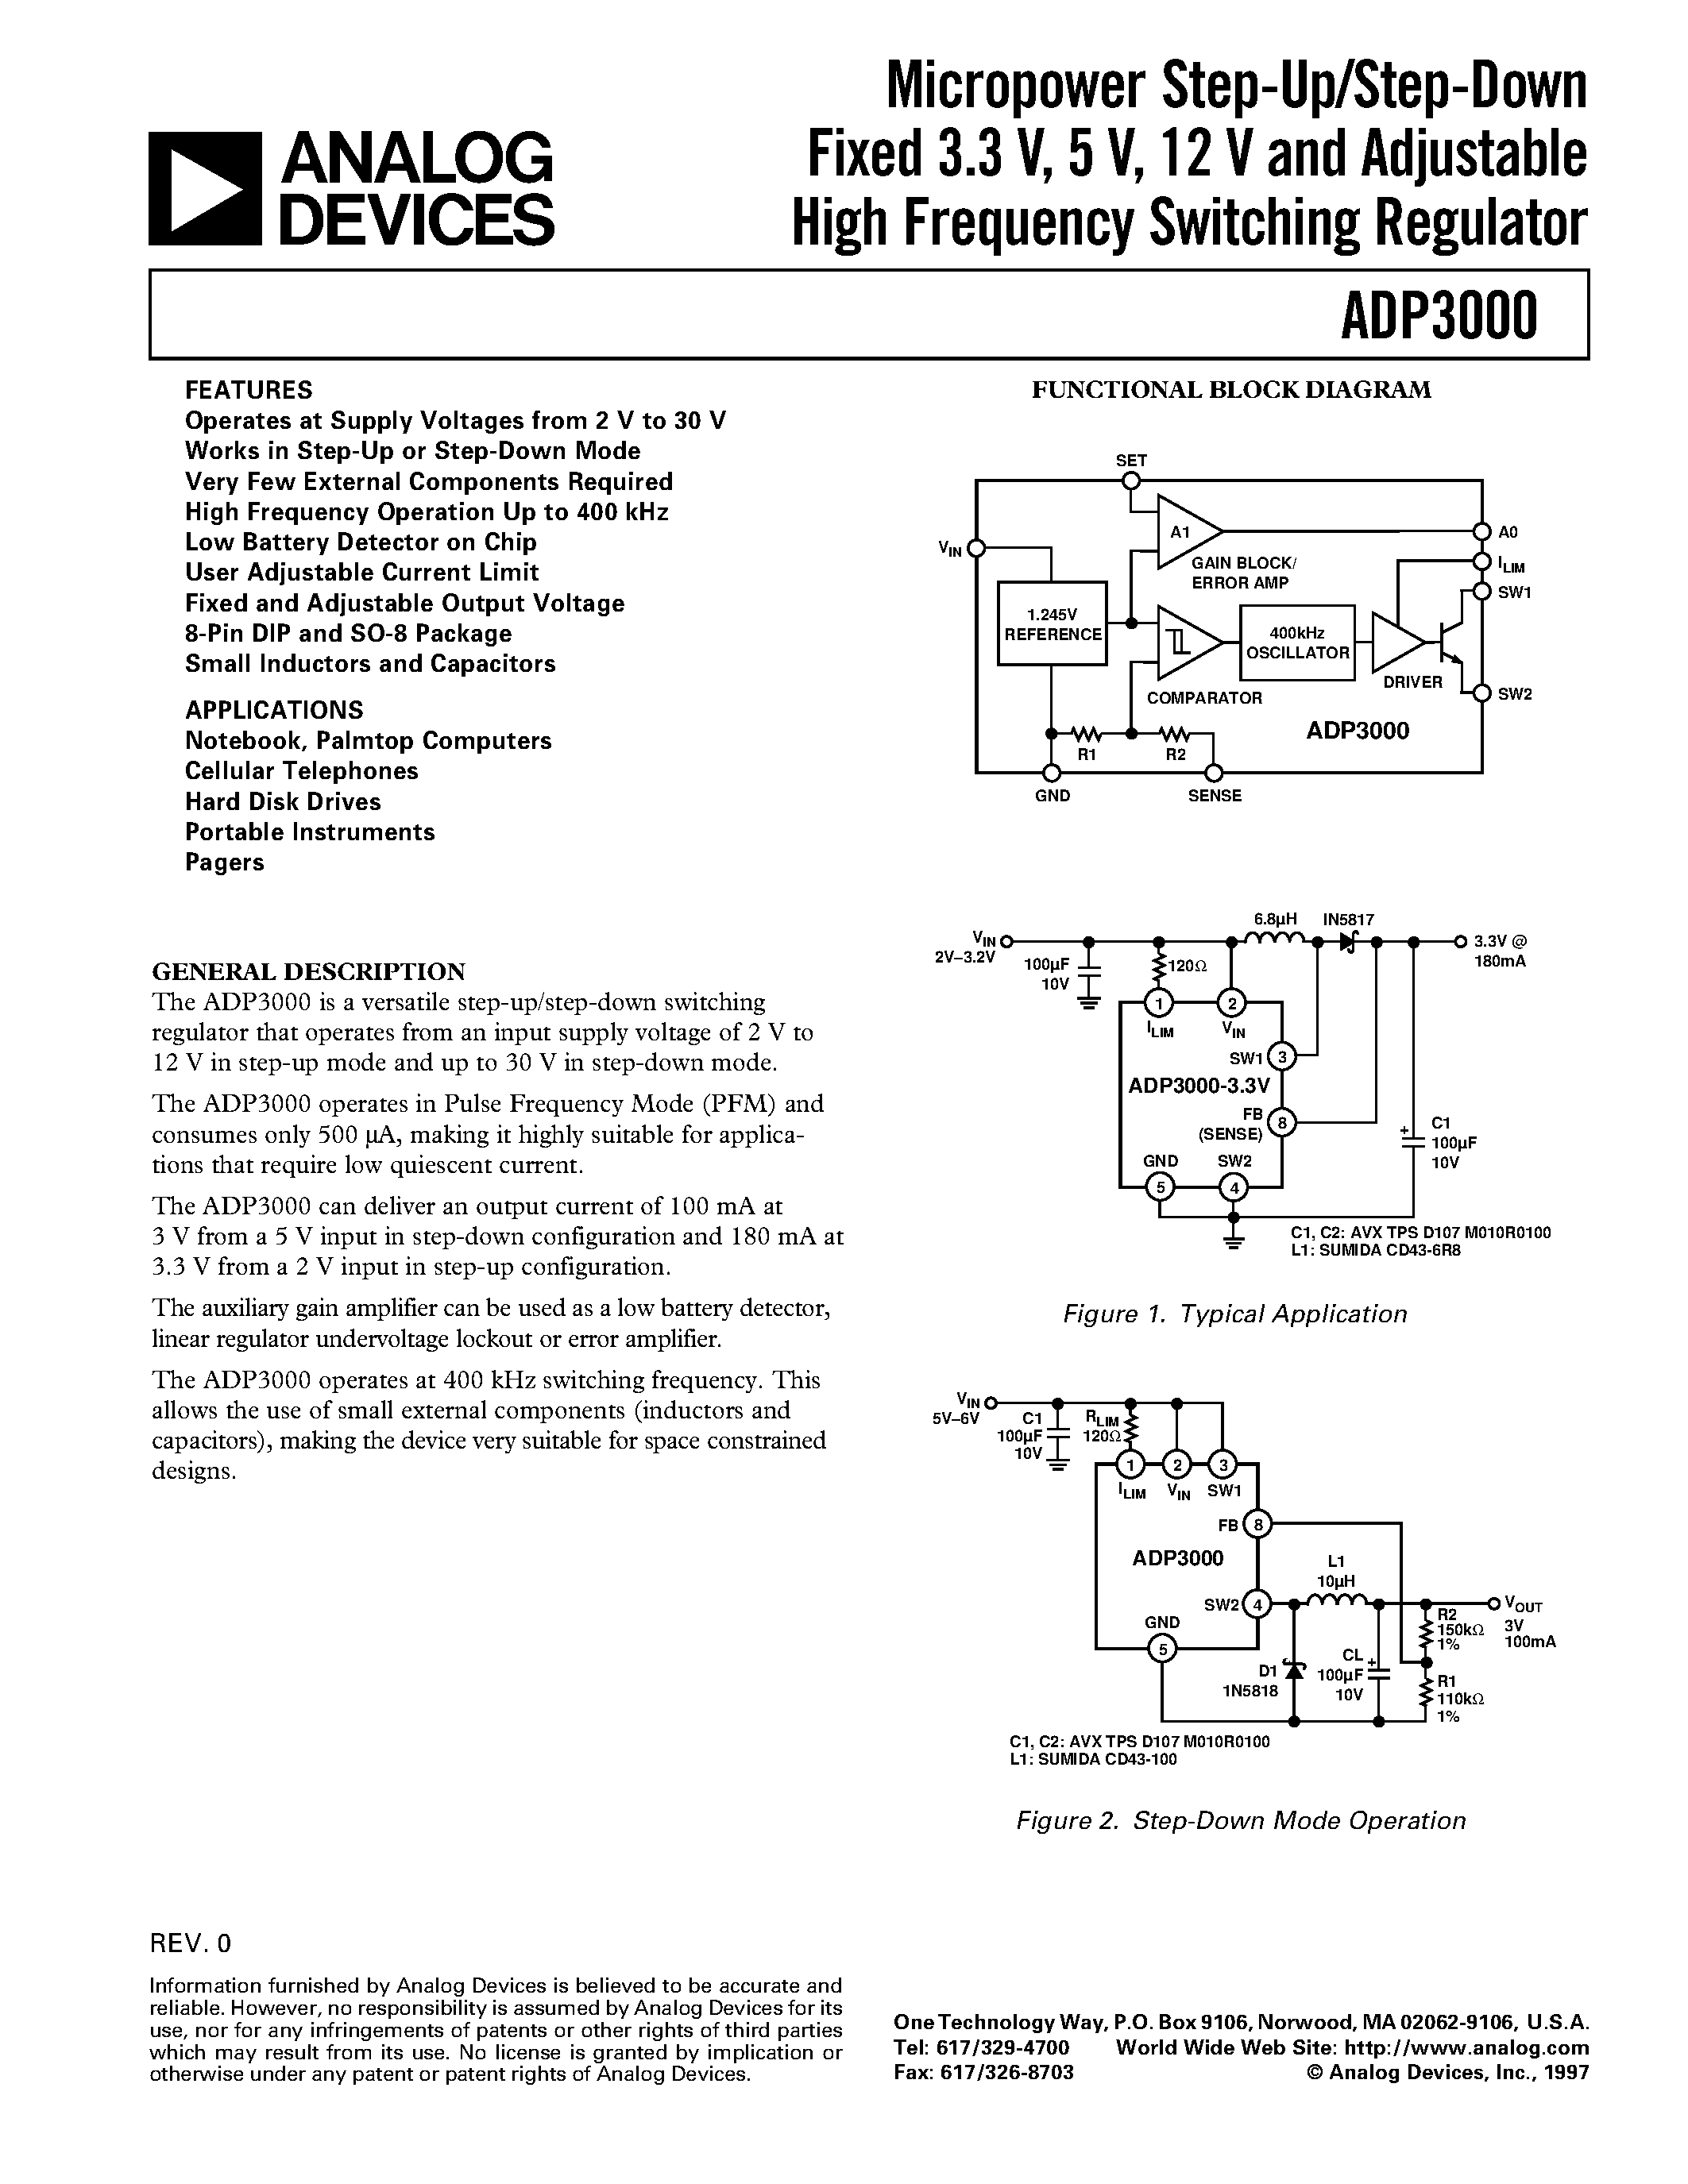 Даташит ADP3000AR-5 - Micropower Step-Up/Step-Down Fixed 3.3 V/ 5 V/ 12 V and Adjustable High Frequency Switching Regulator страница 1